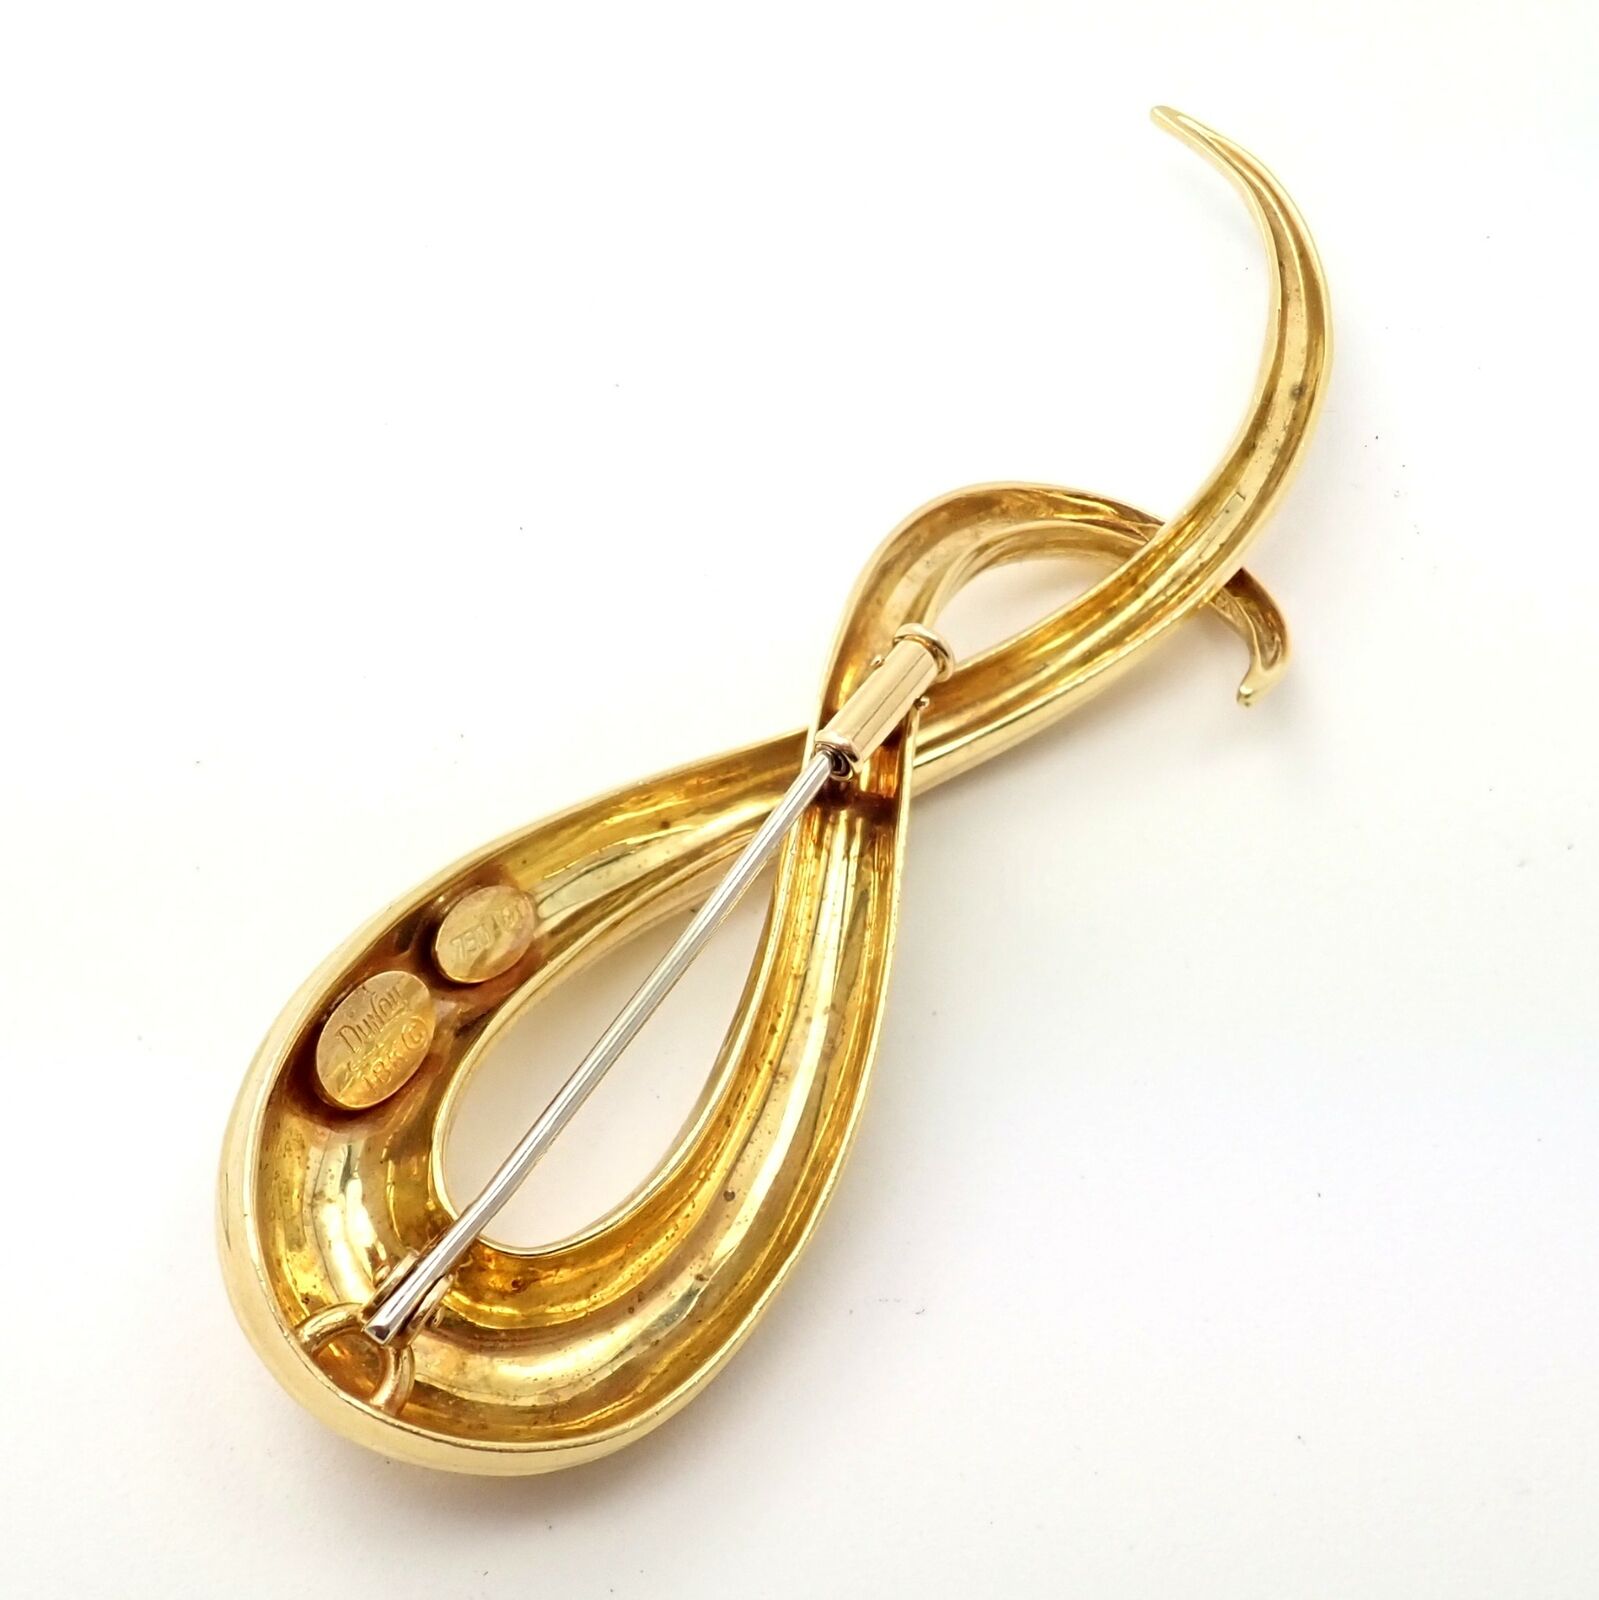 Rare! Authentic Vintage Hermes Paris 18K Yellow Gold Brooch Pin